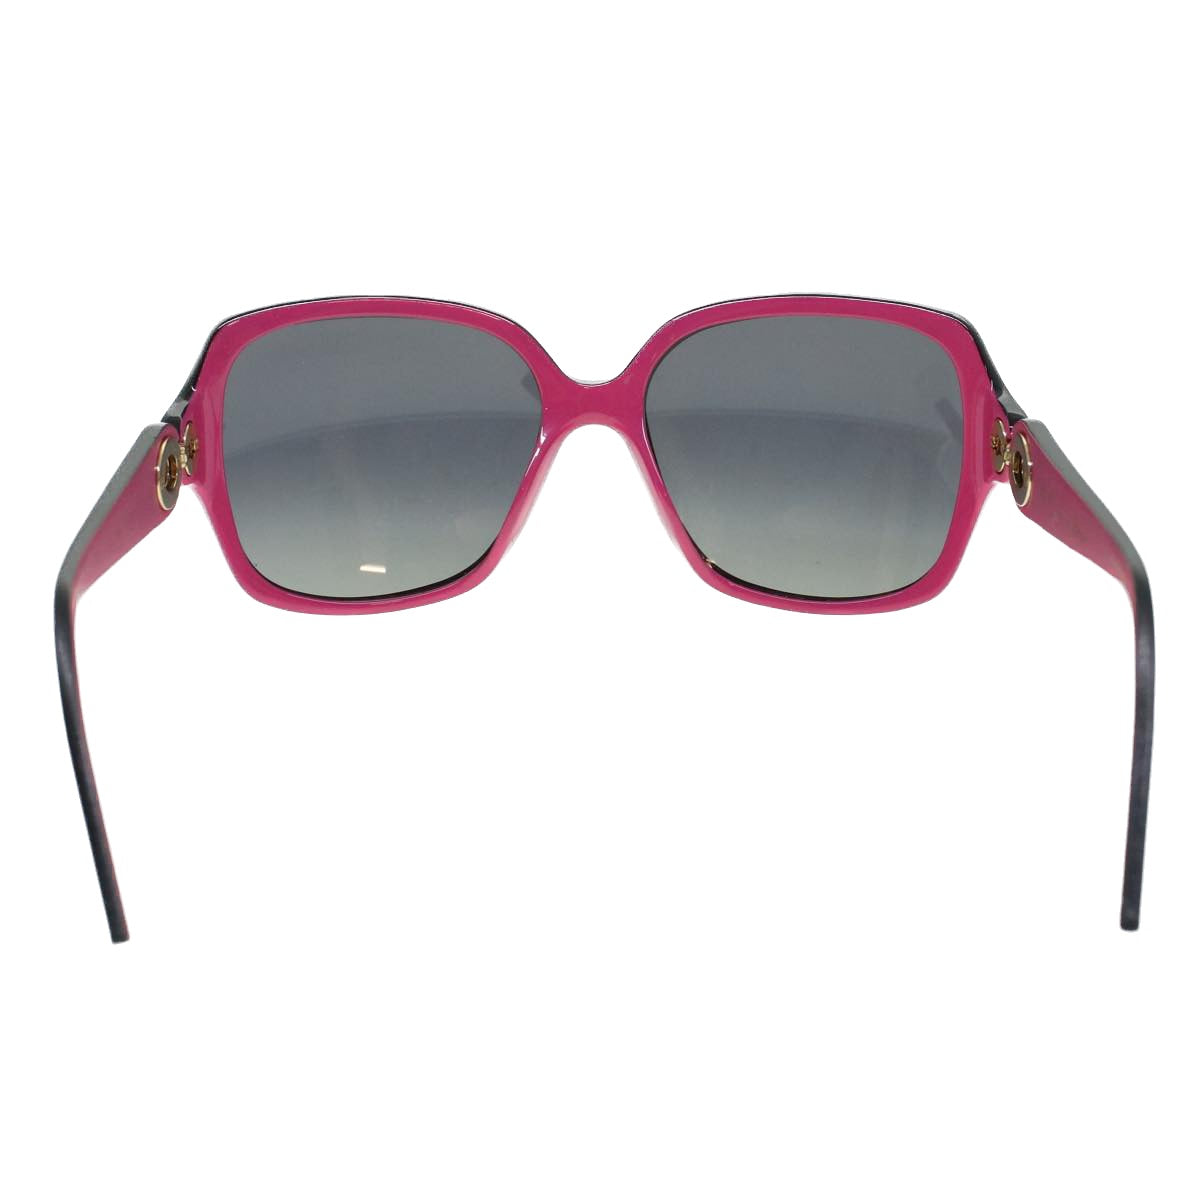 Christian Dior Sunglasses Black Pink Auth cl607